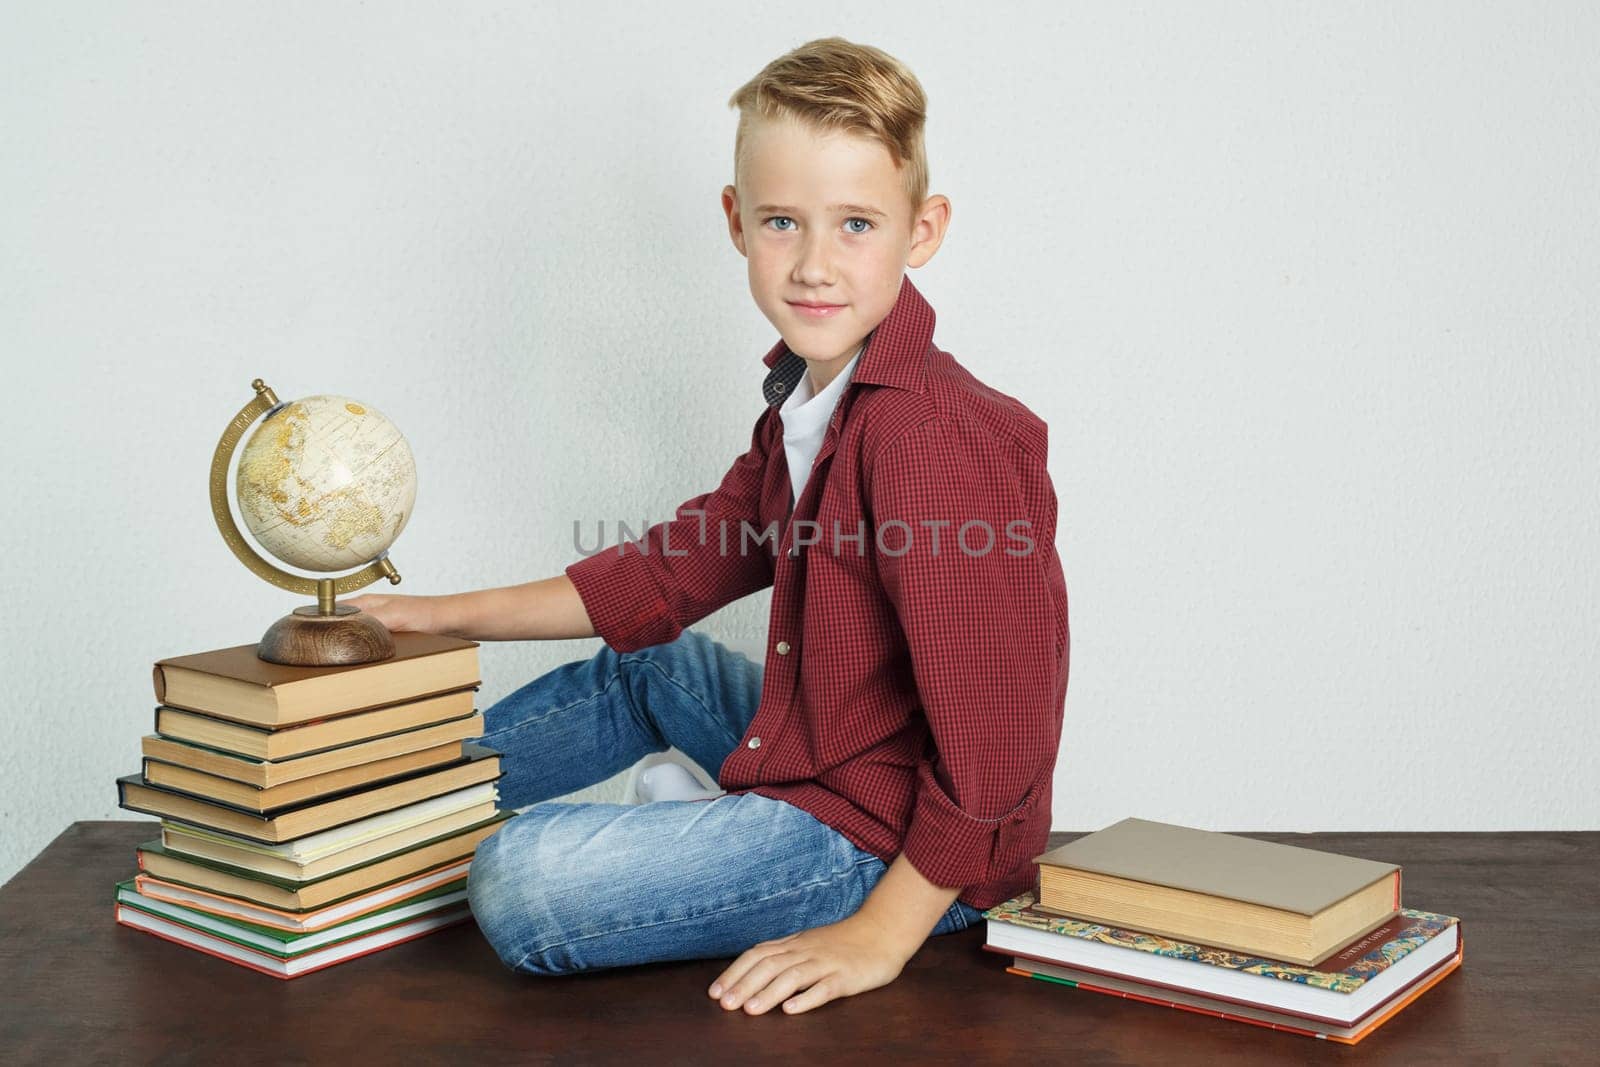 A schoolboy sits at a desk near books and holds a globe with his hand. by Sd28DimoN_1976